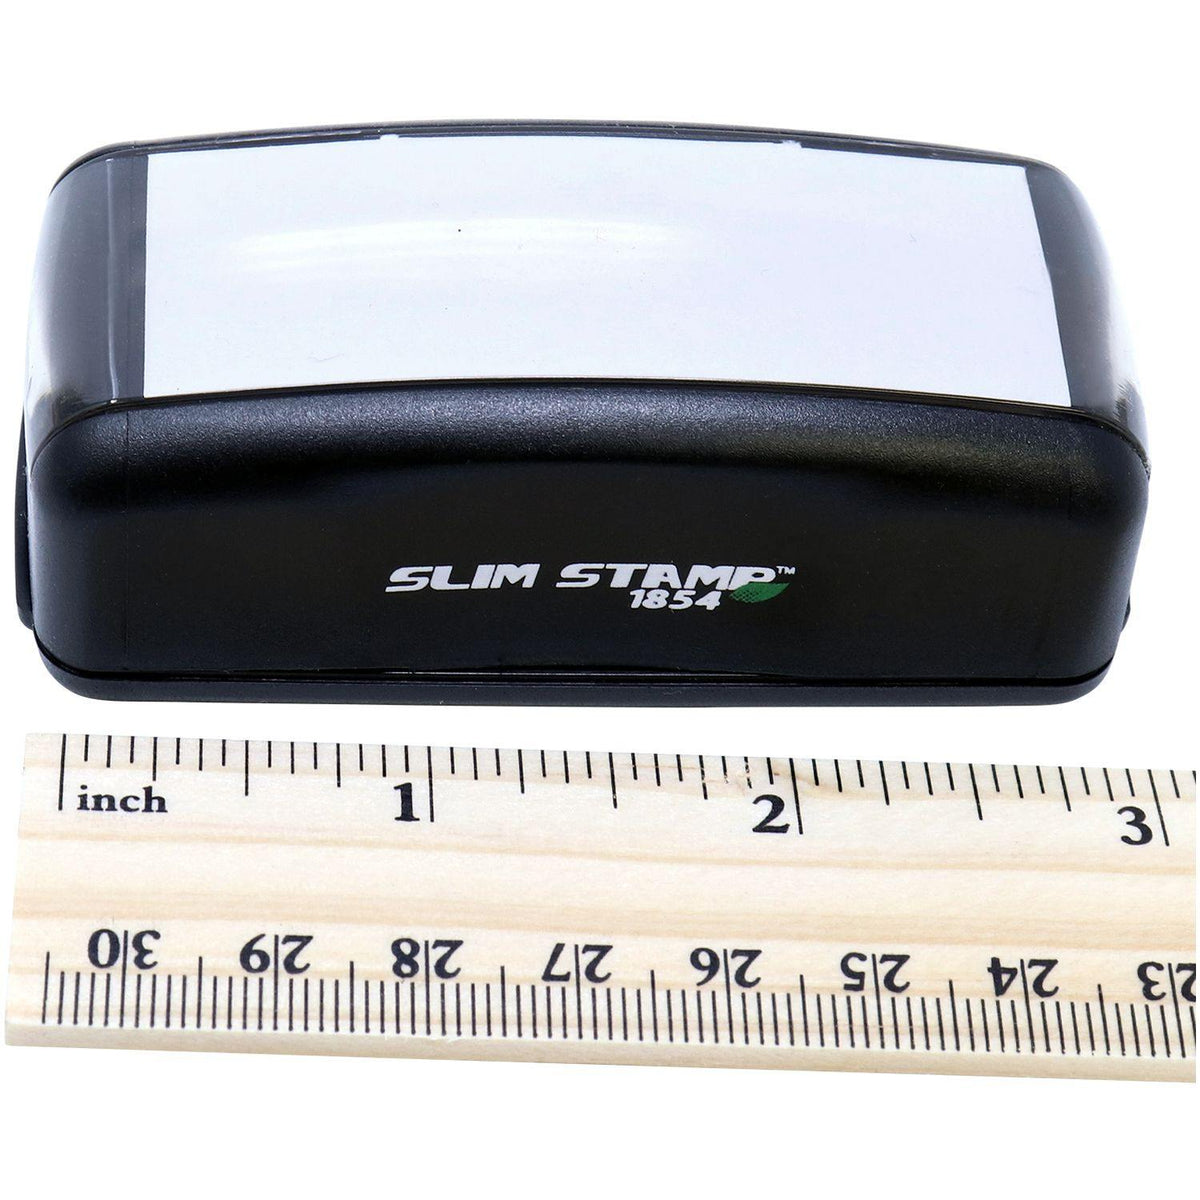 Measurement Large Pre Inked Show All Of Your Work Stamp with Ruler